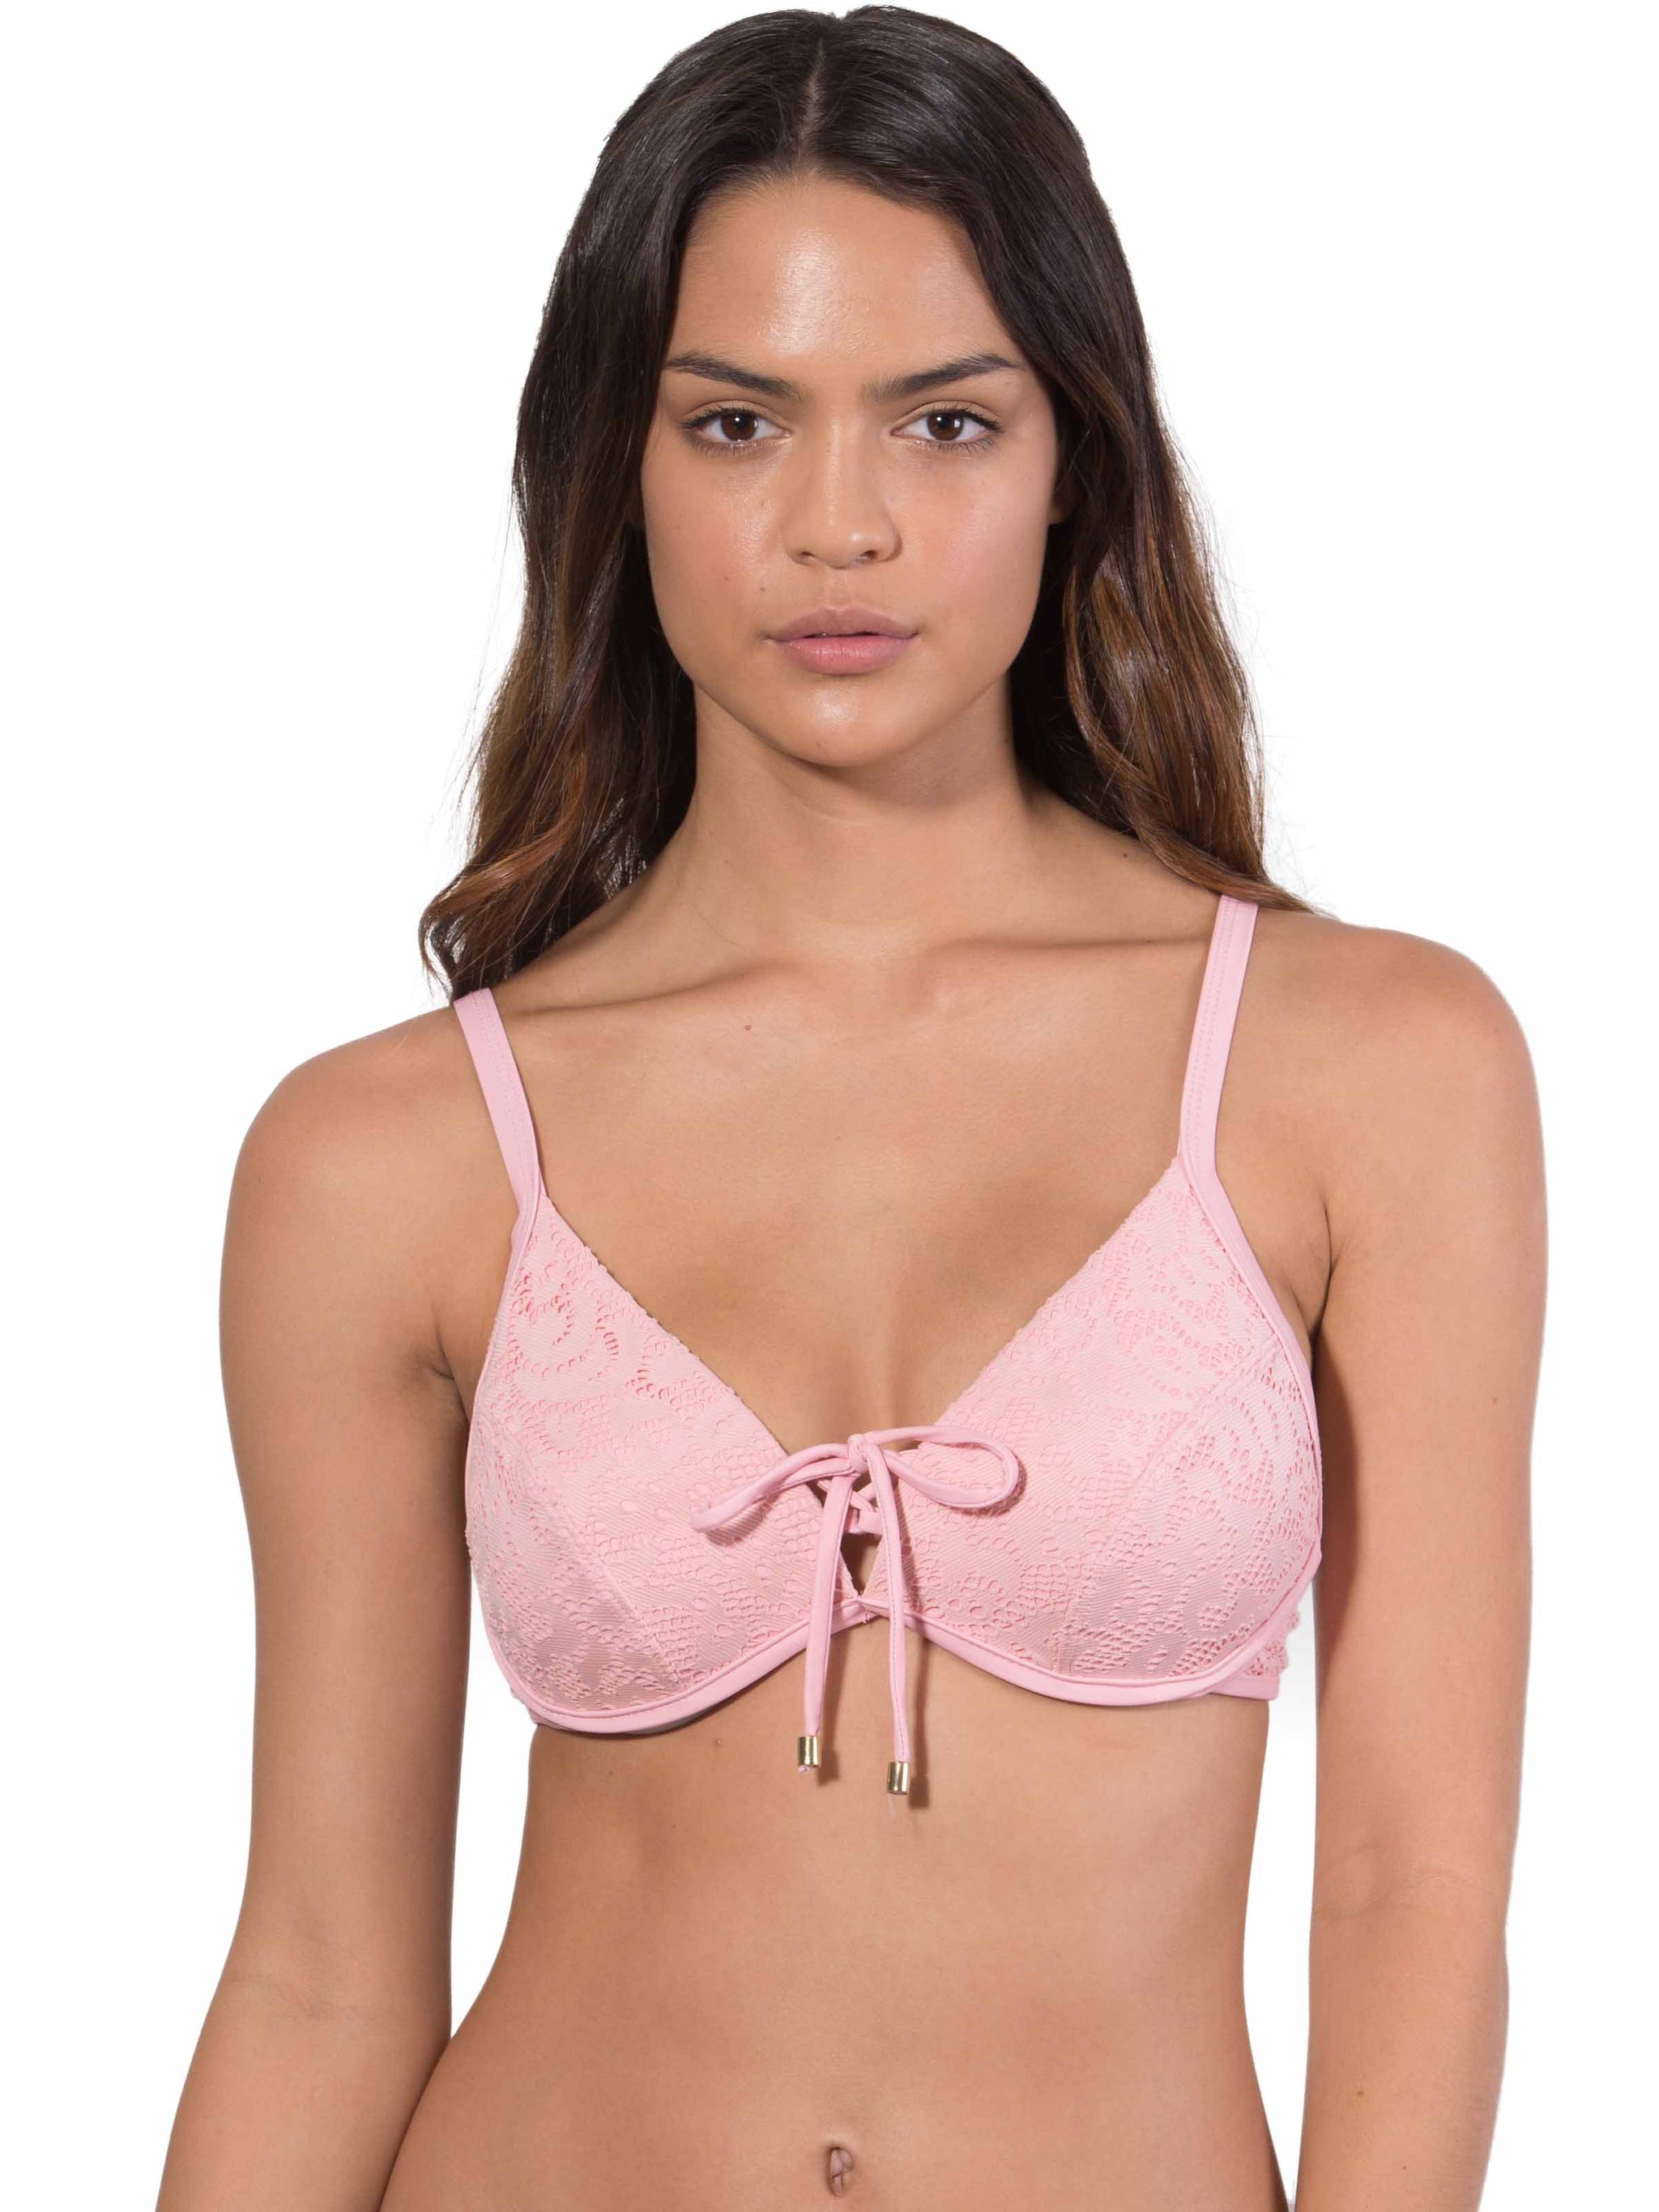 Tea Rose French Connection D Cup Bikini Top